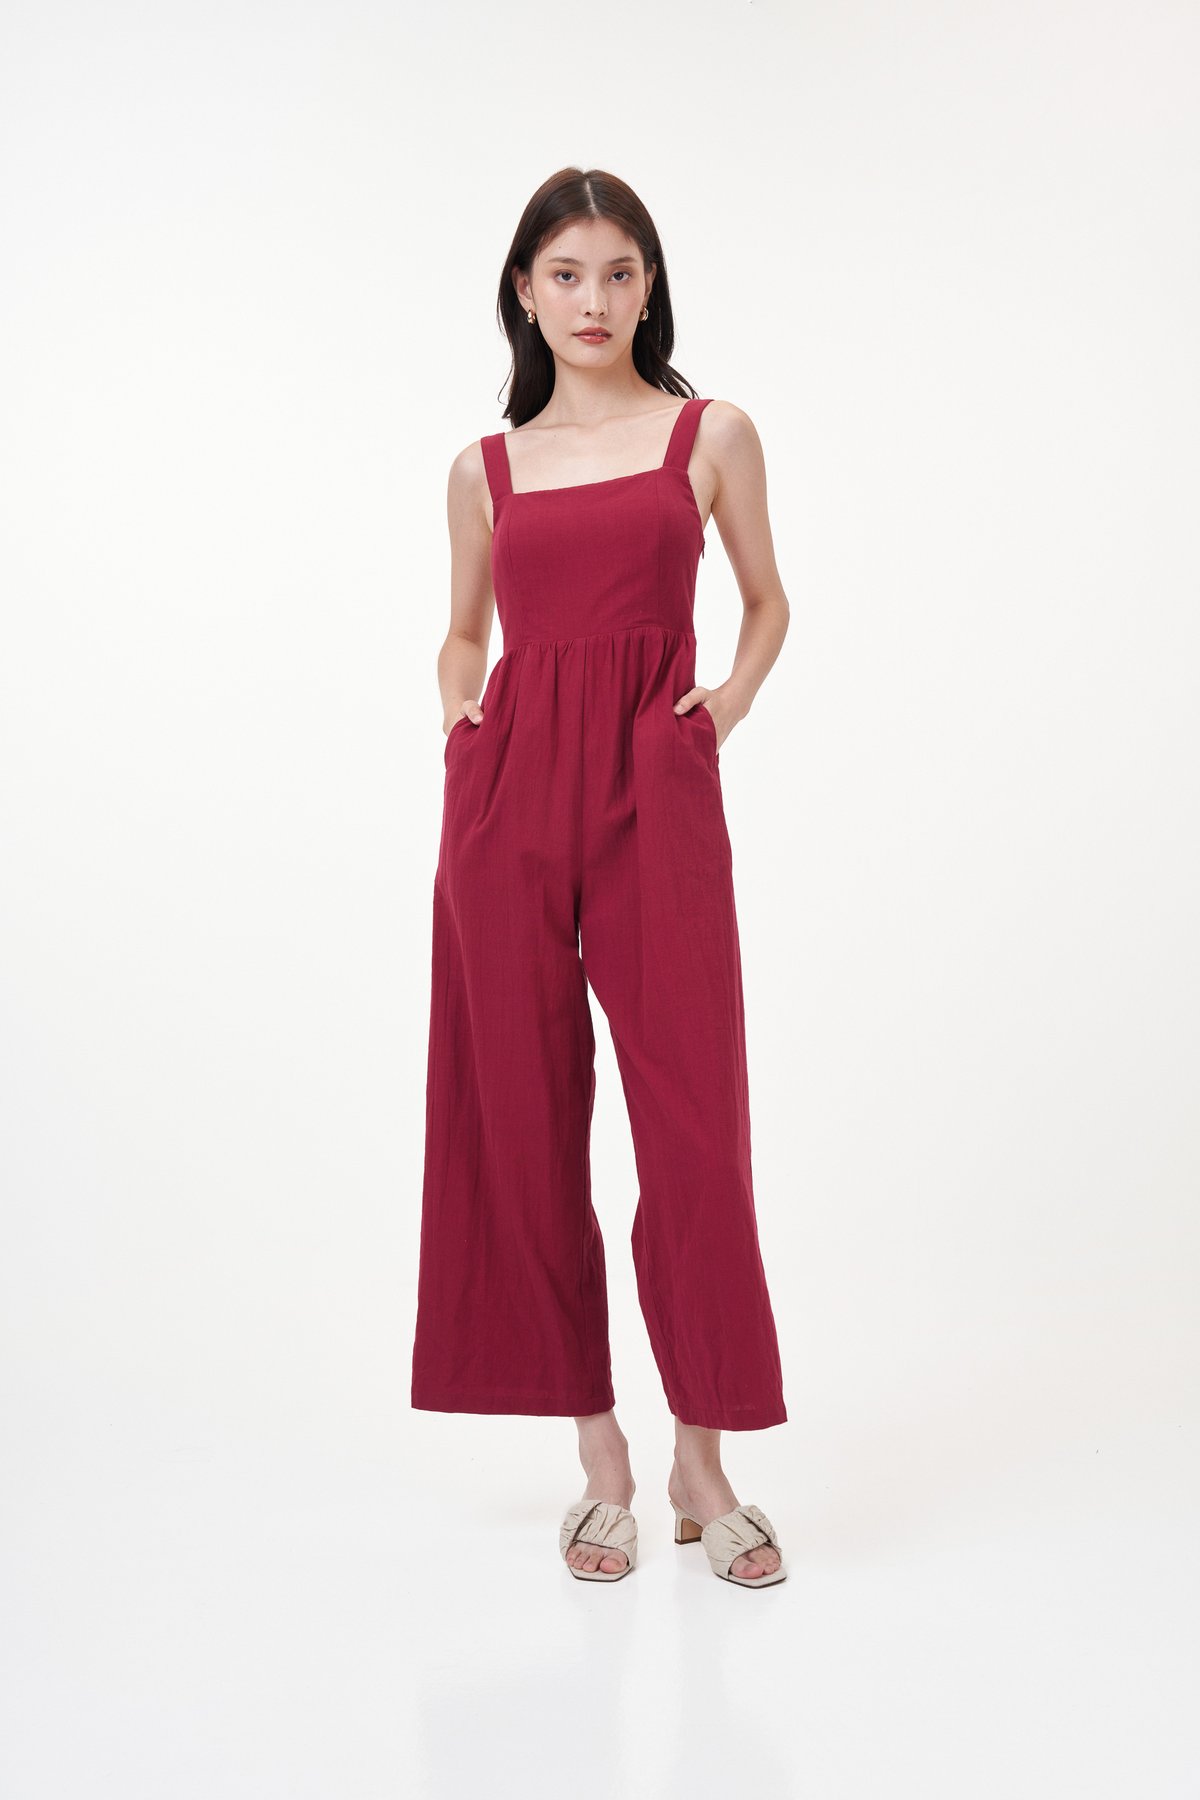 Sherley Padded Jumpsuit